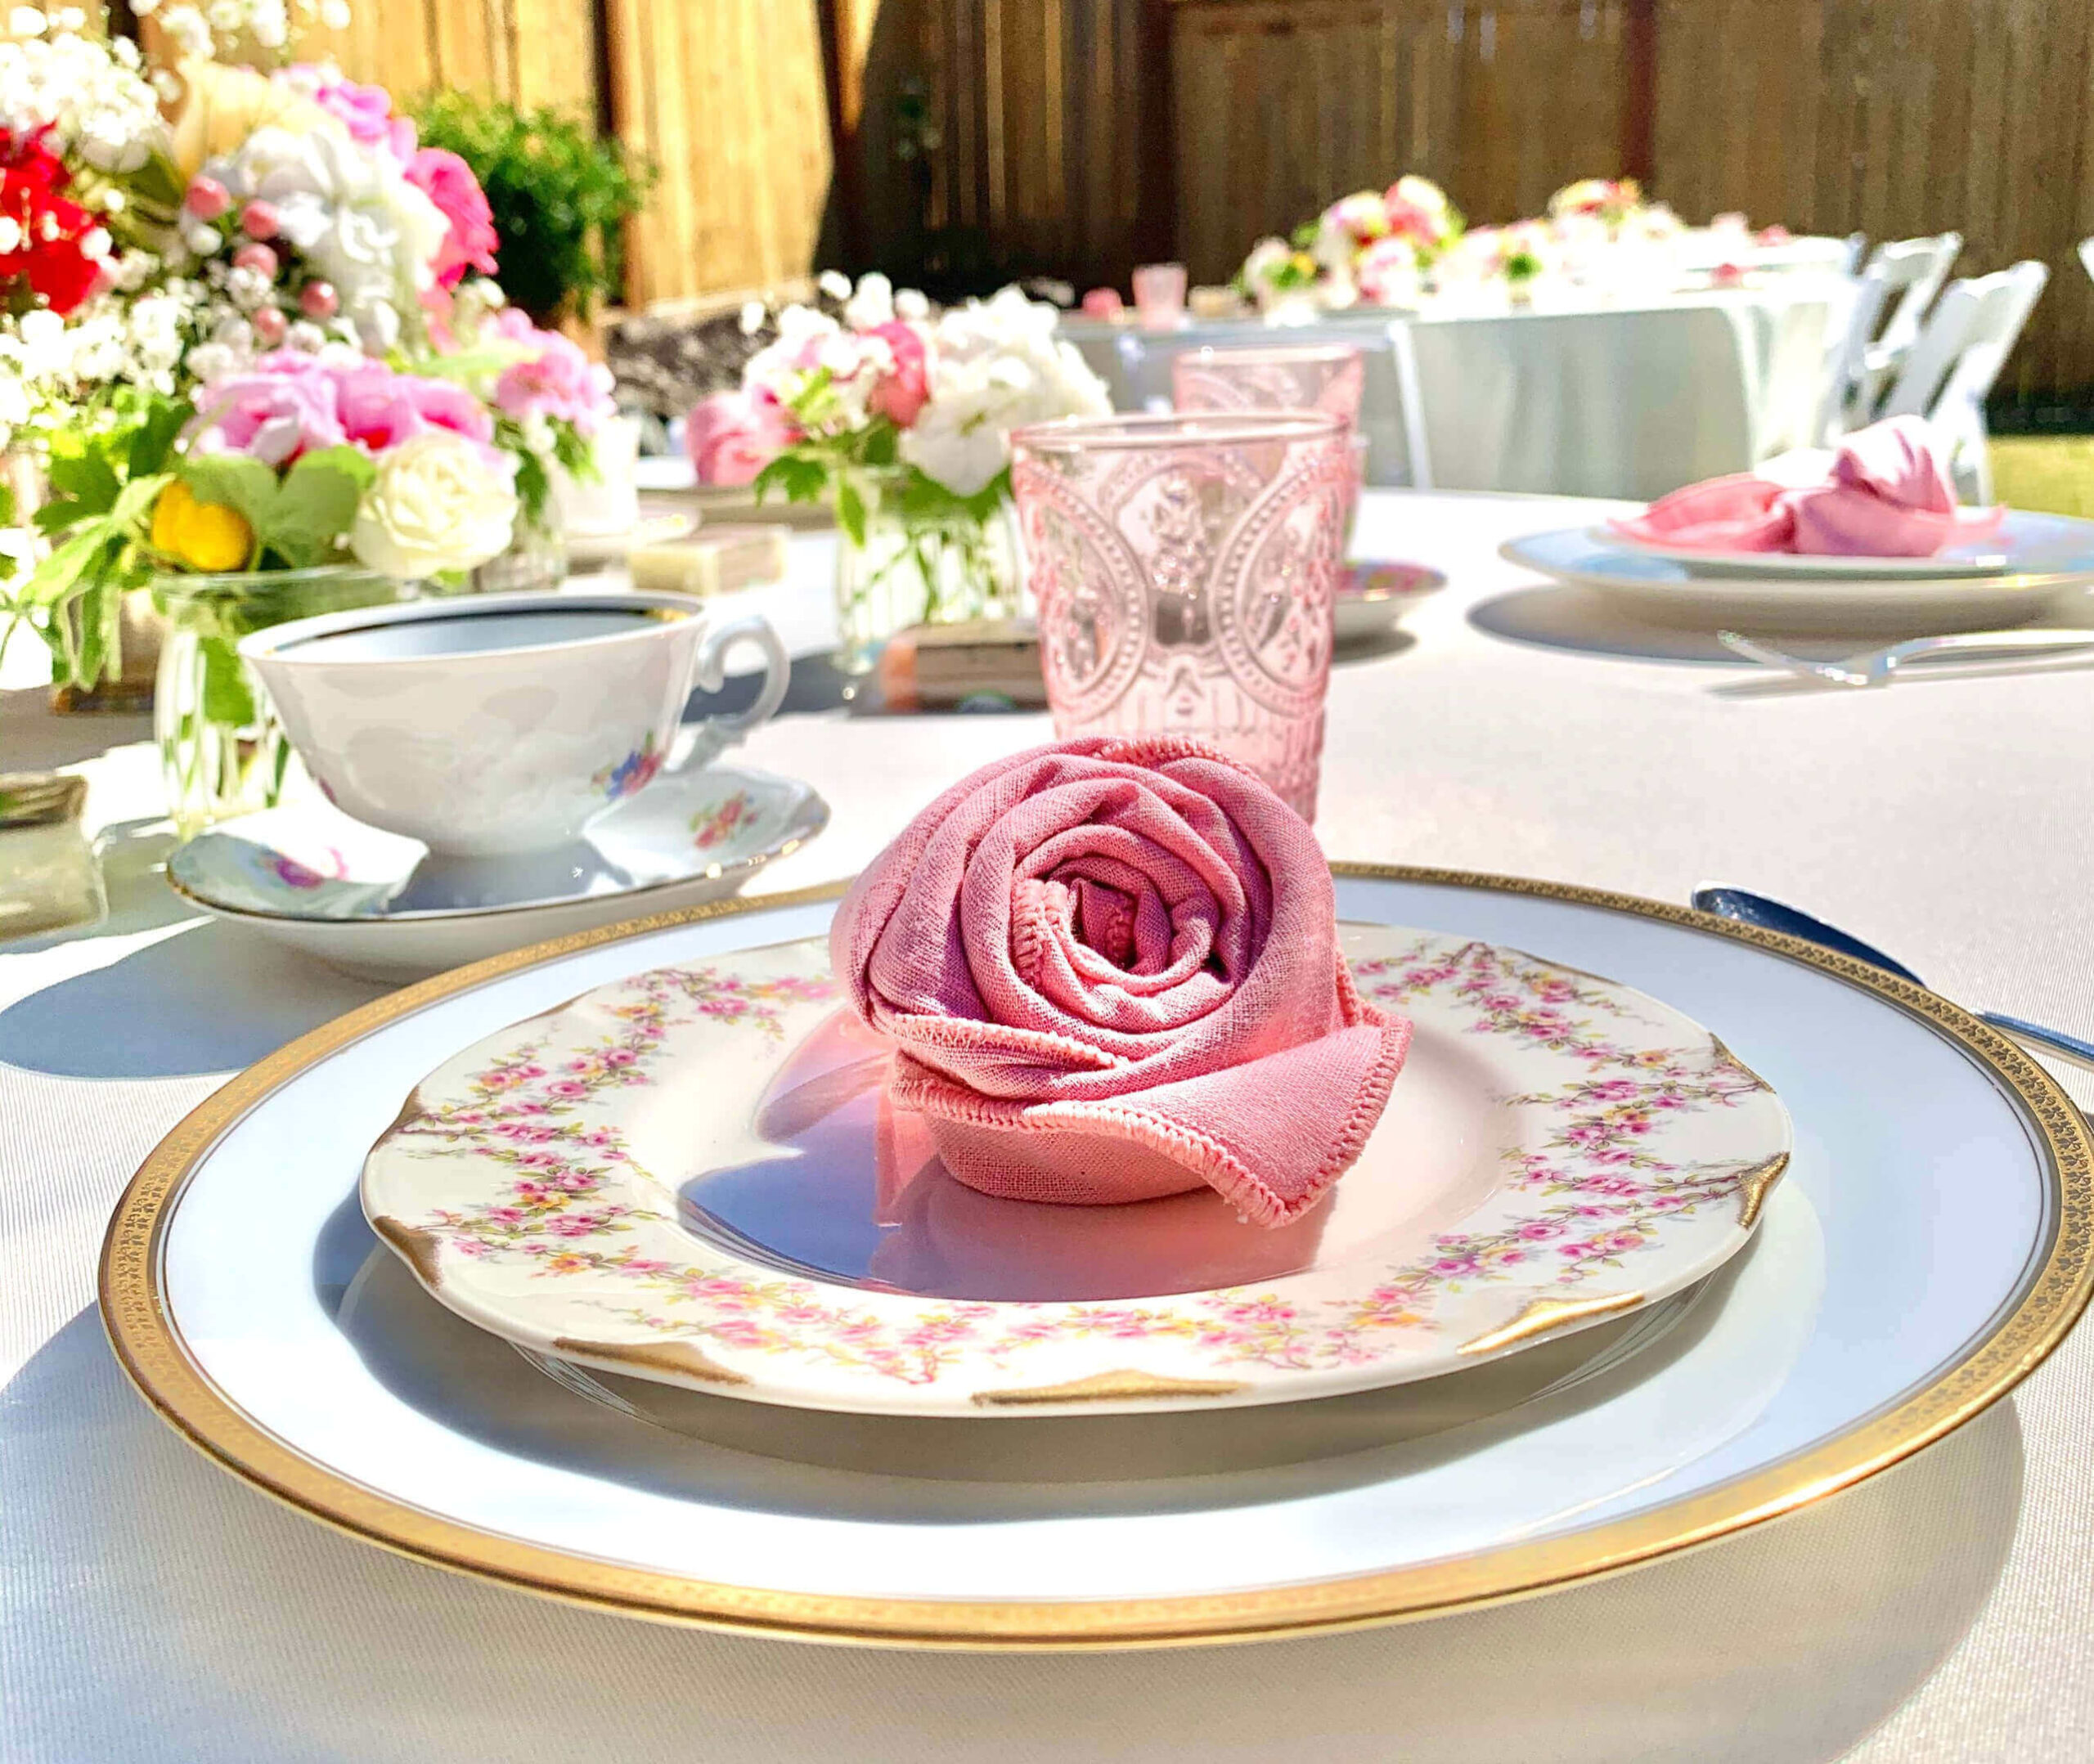 A close up on a tabe set up, pink napkin shaped into a rose bud, vintage crockery with pink floral patterns, a white charger plate with gold edging. Pink glassware, vintage crockery tea sets and bright florals